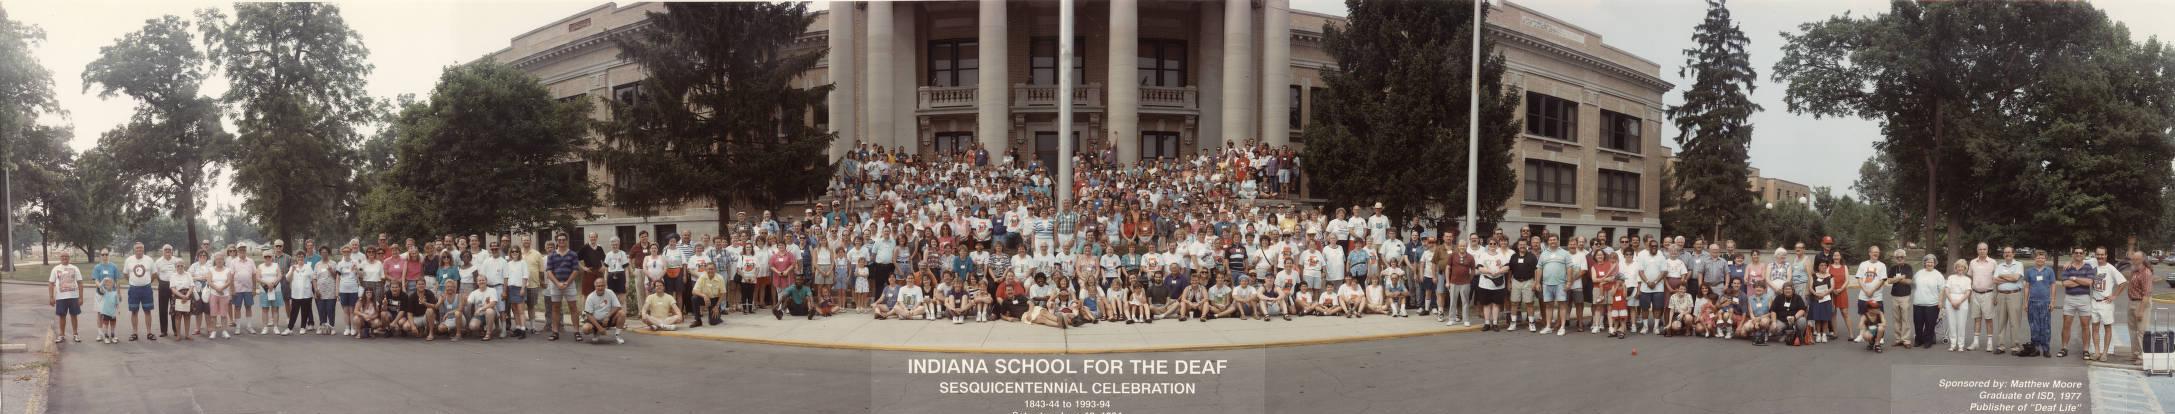 indiana-school-for-the-deaf-4-cropped.jpg